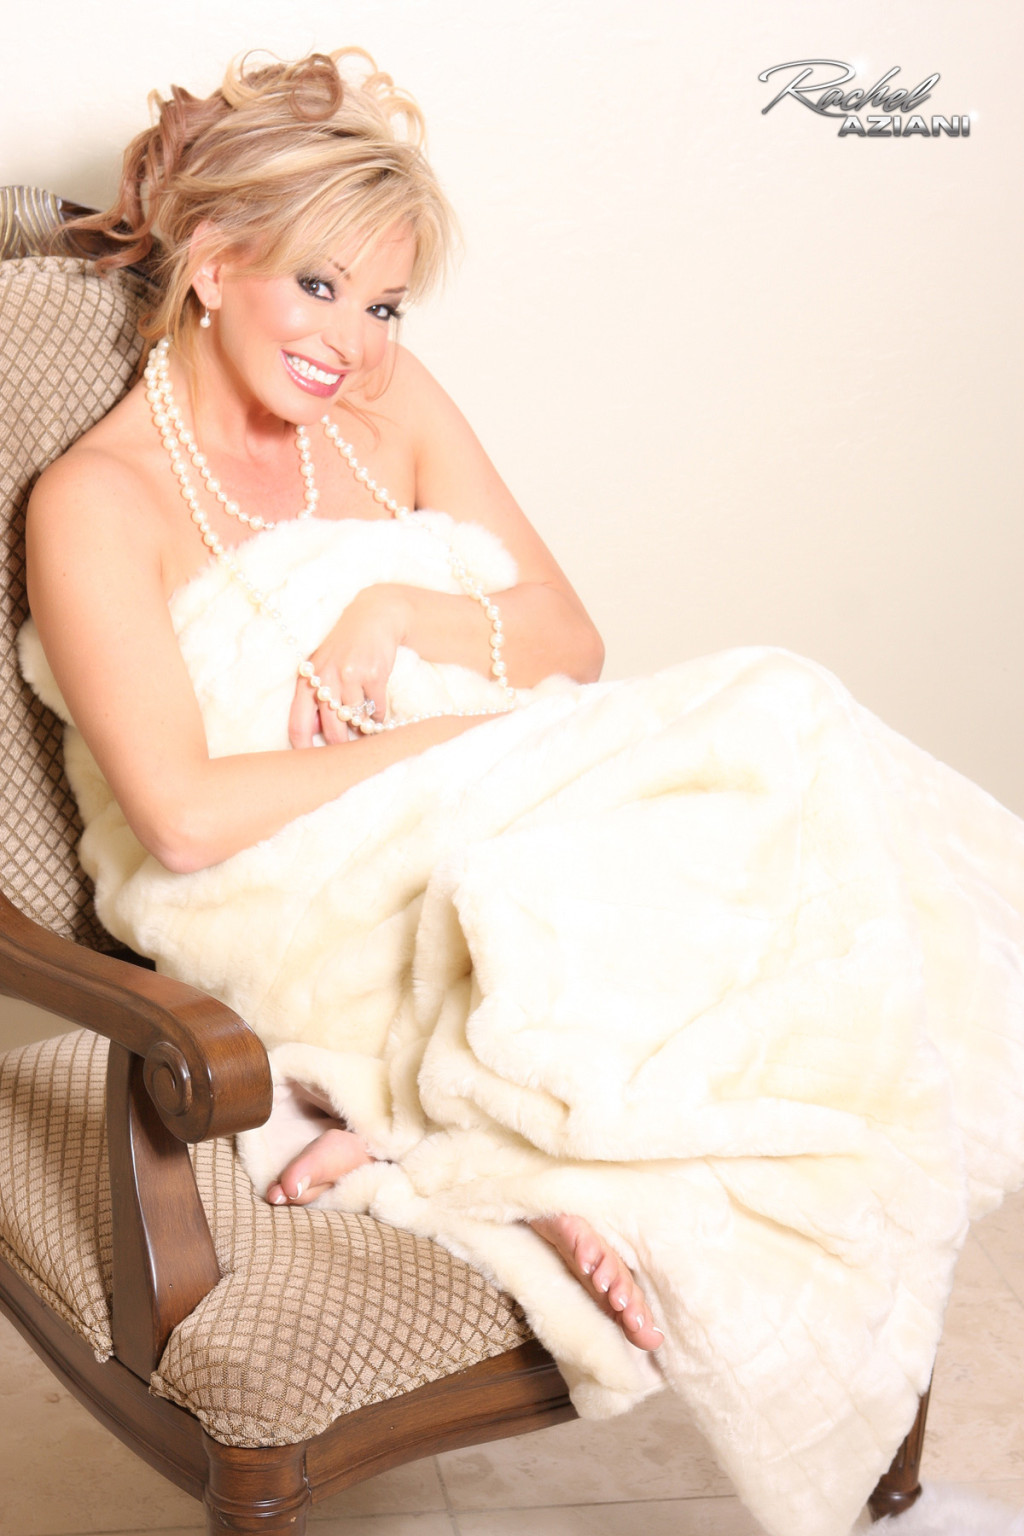 Rachel Aziani is stunning wearing nothing but pearls and a blanket! #73535012